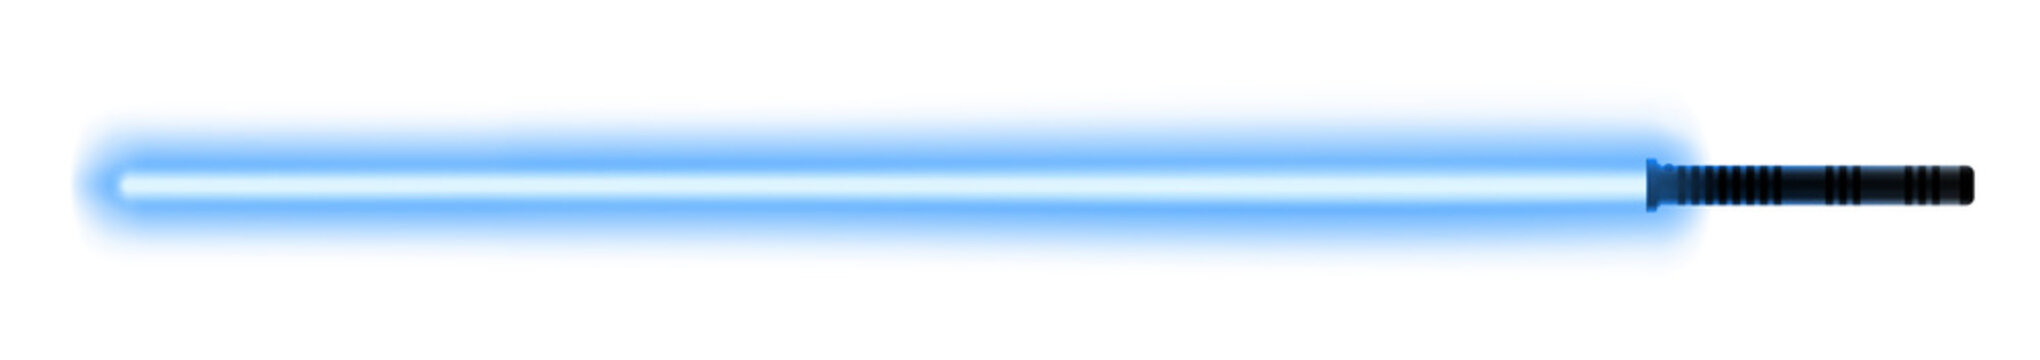 Blue light sword for the fights during the wars in the stars. Melee laser weapon for the close combats.